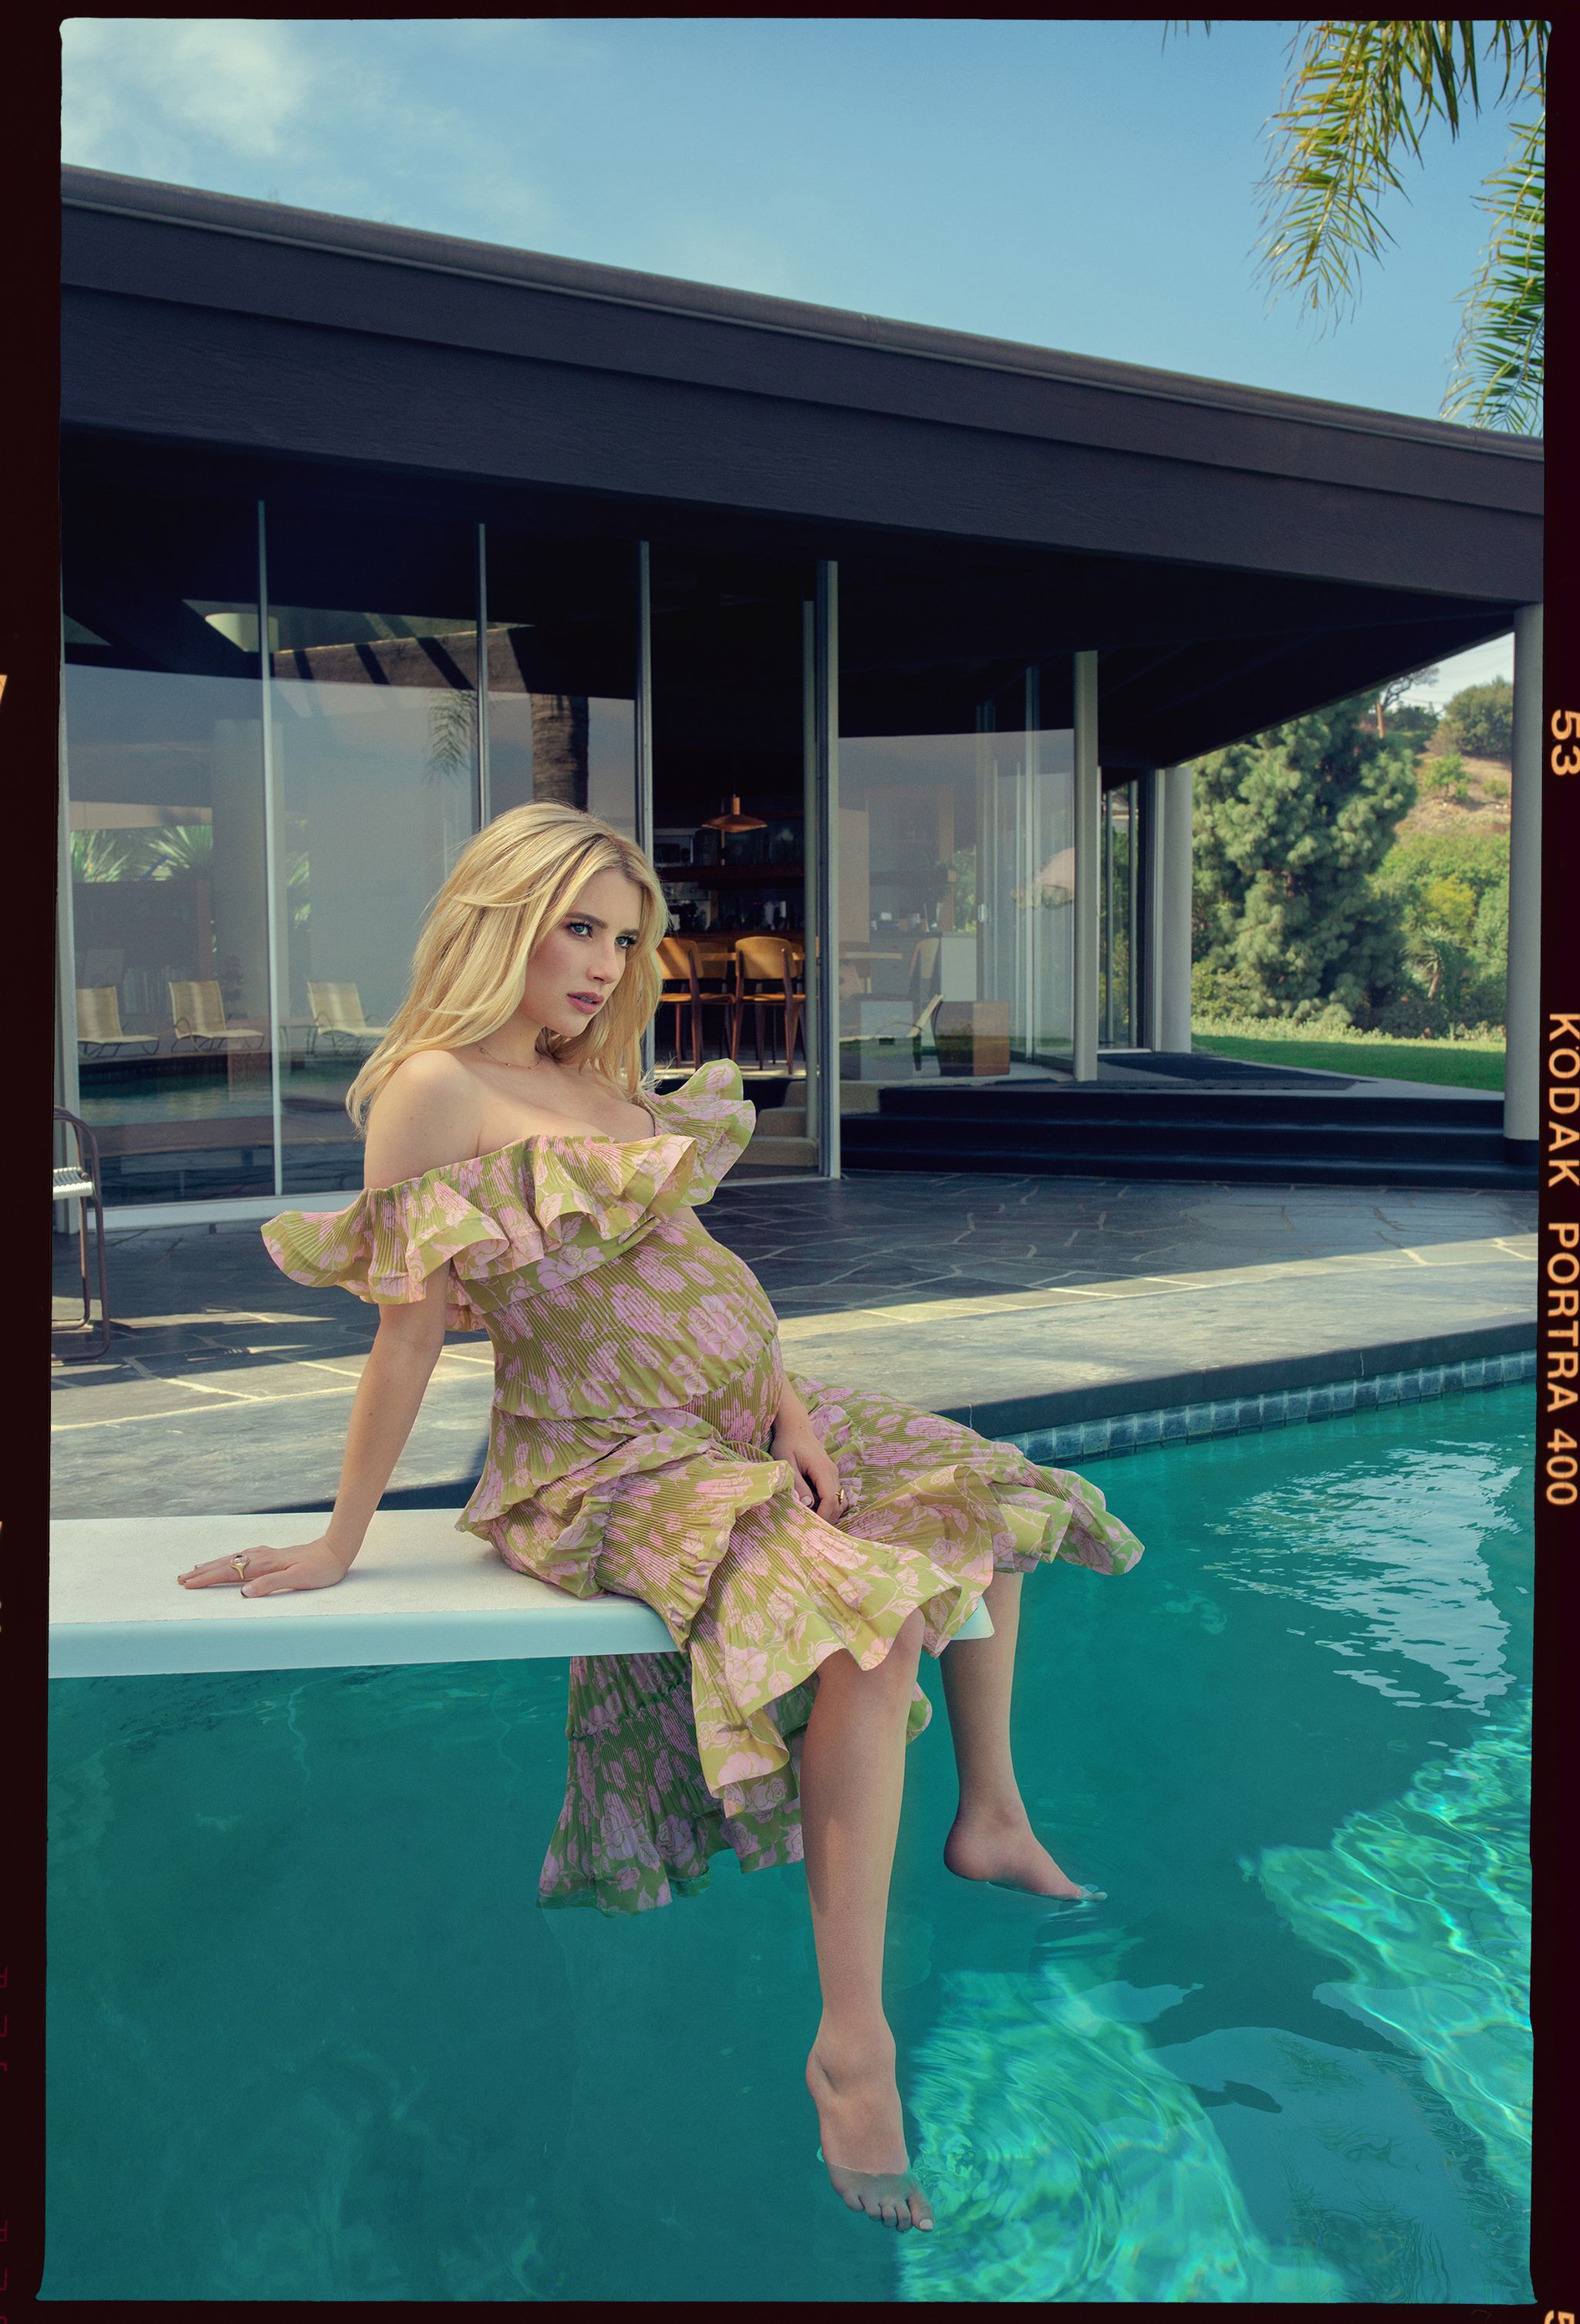 emma roberts, pregnant, wearing a green and pink rose flower dress, sitting on a diving board above pool near home